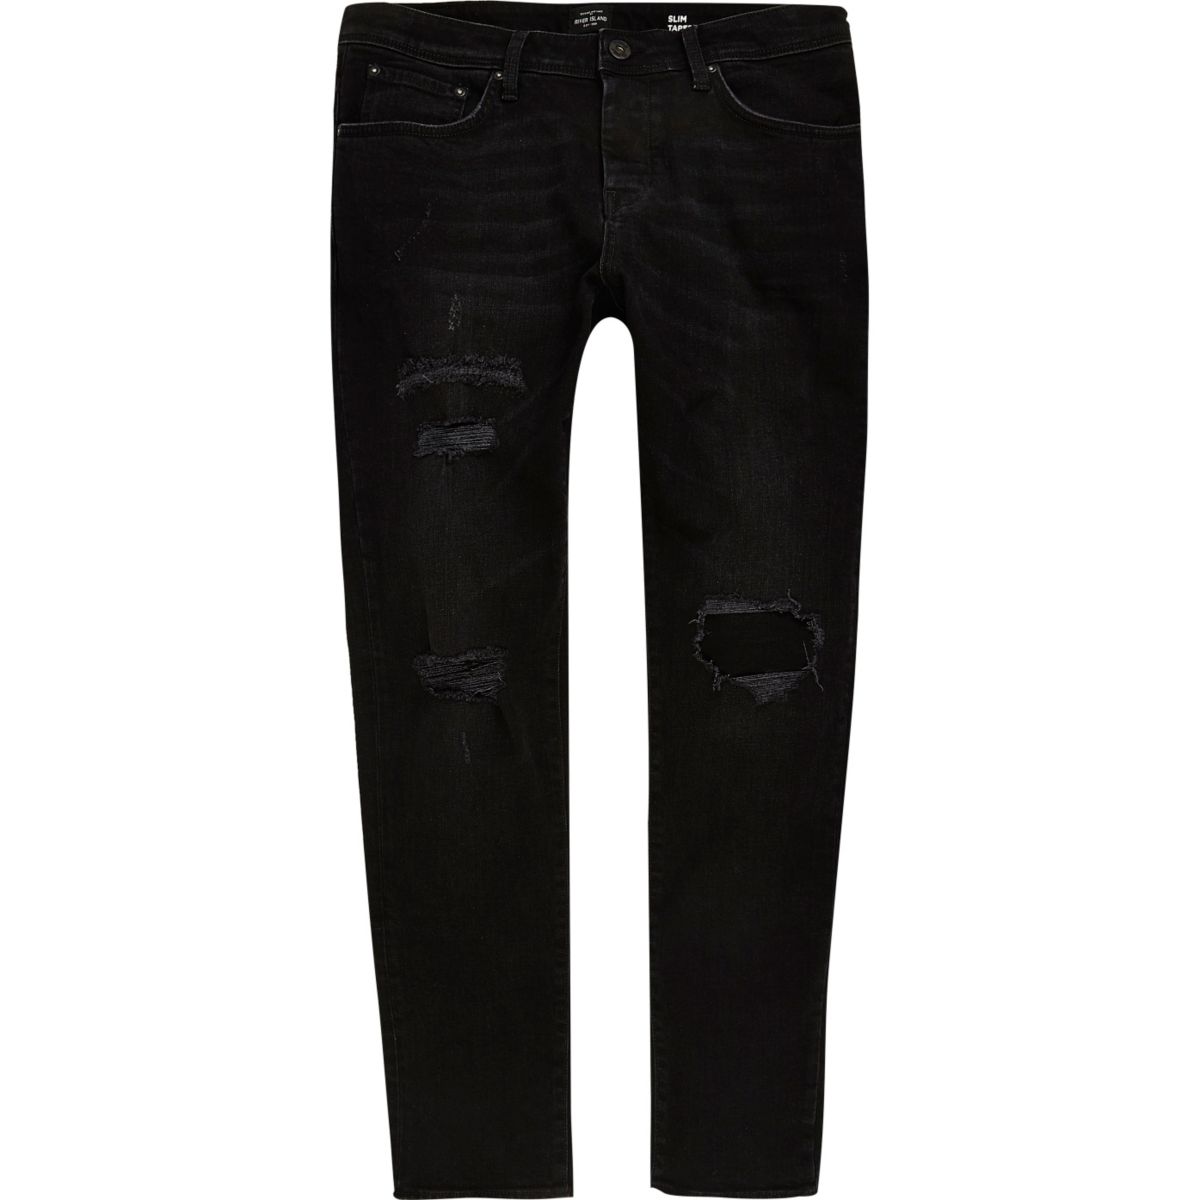 Black ripped Jimmy slim tapered jeans - Jeans - Sale - men